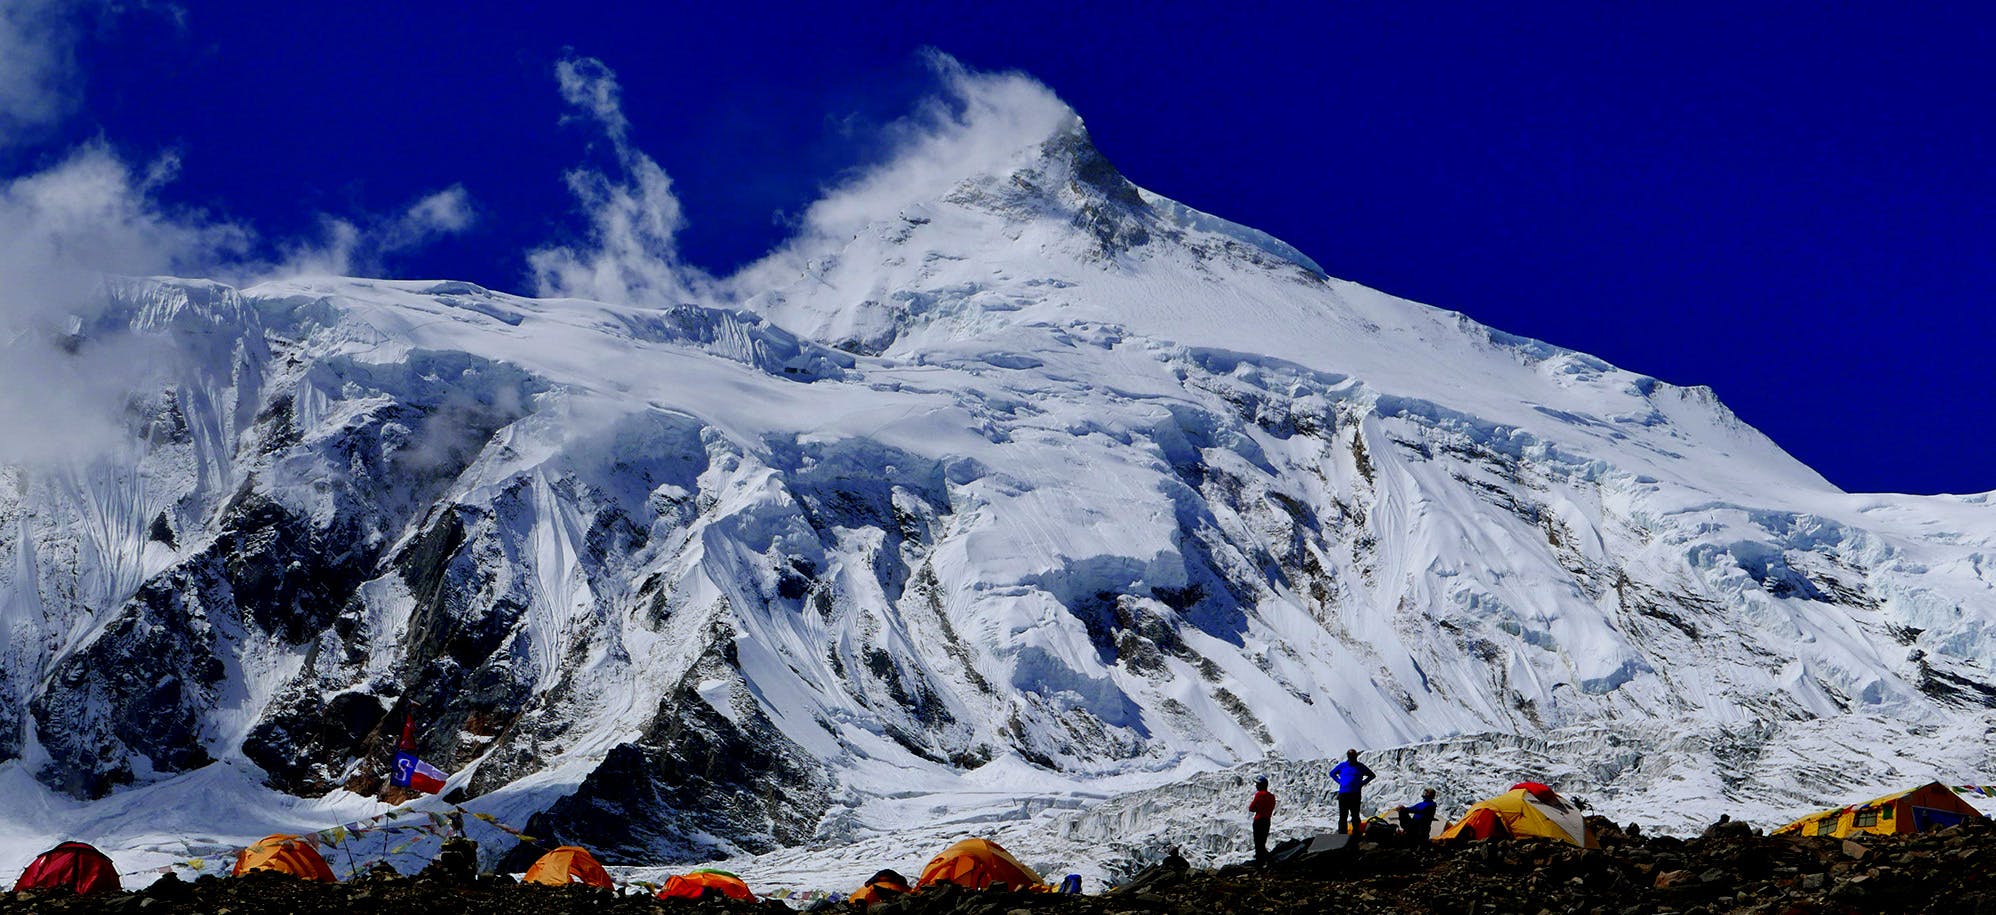 What is the difficulty level of climbing Manaslu?